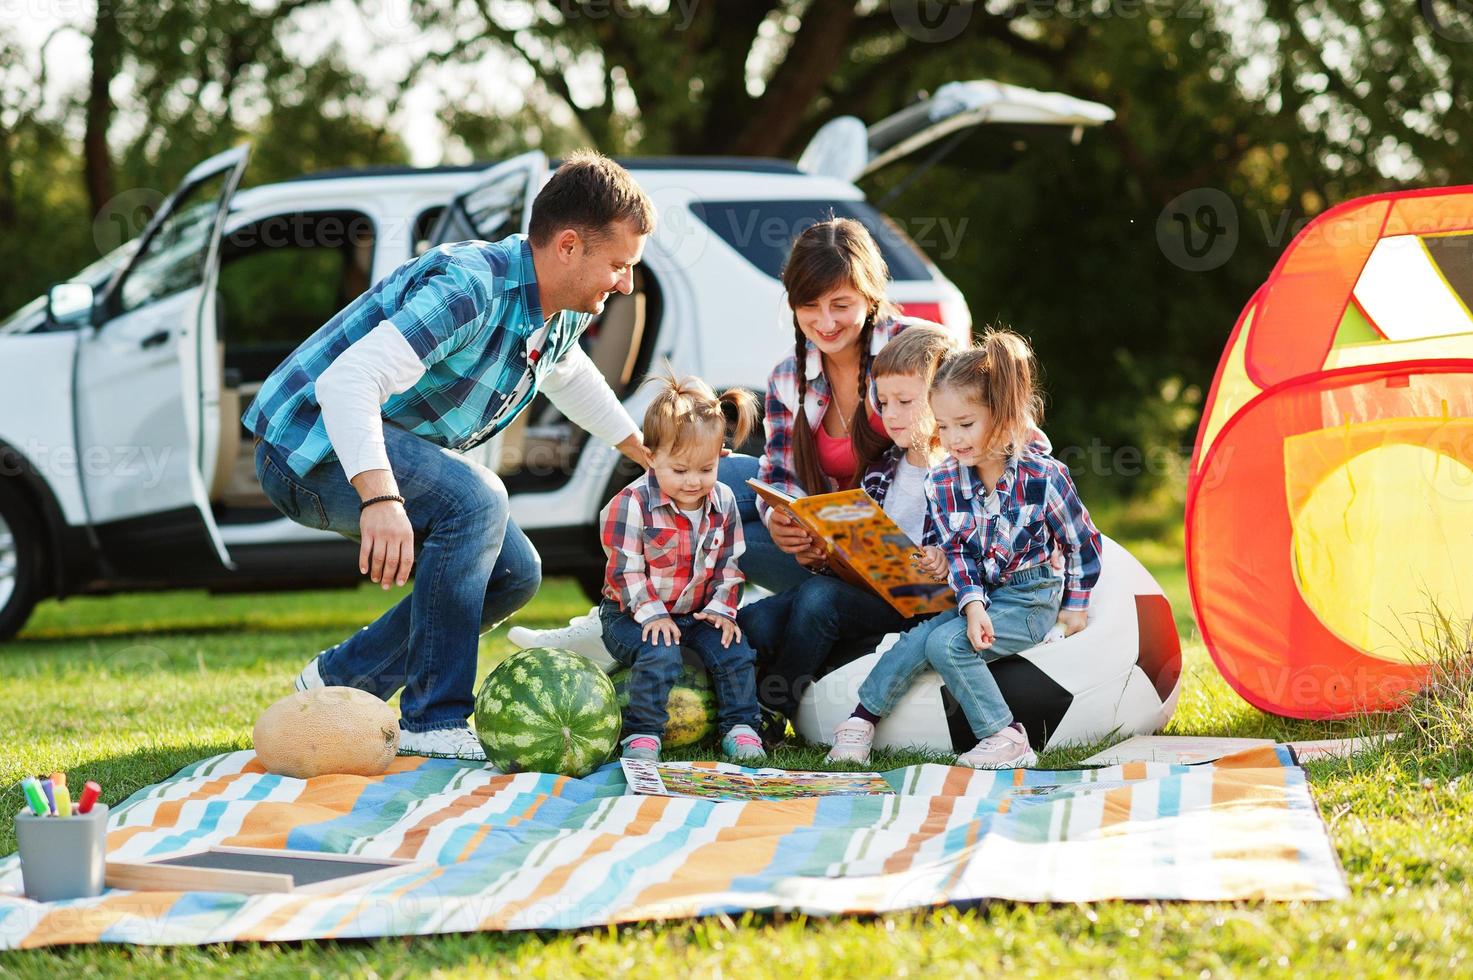 Family spending time together. Three kids. Outdoor picnic blanket. photo